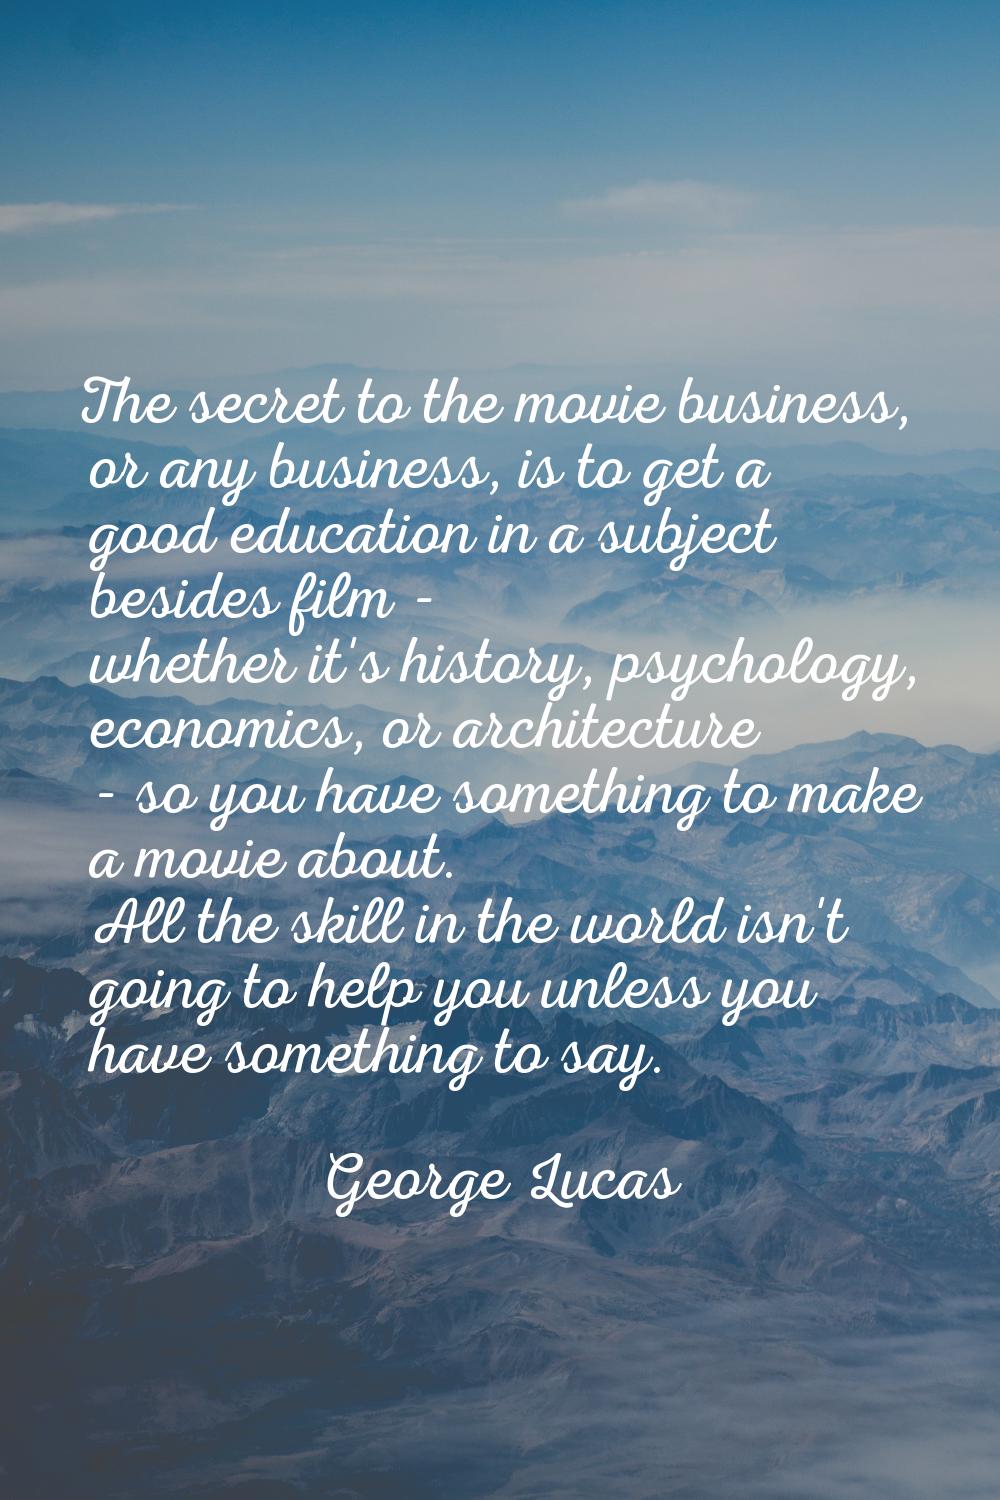 The secret to the movie business, or any business, is to get a good education in a subject besides 